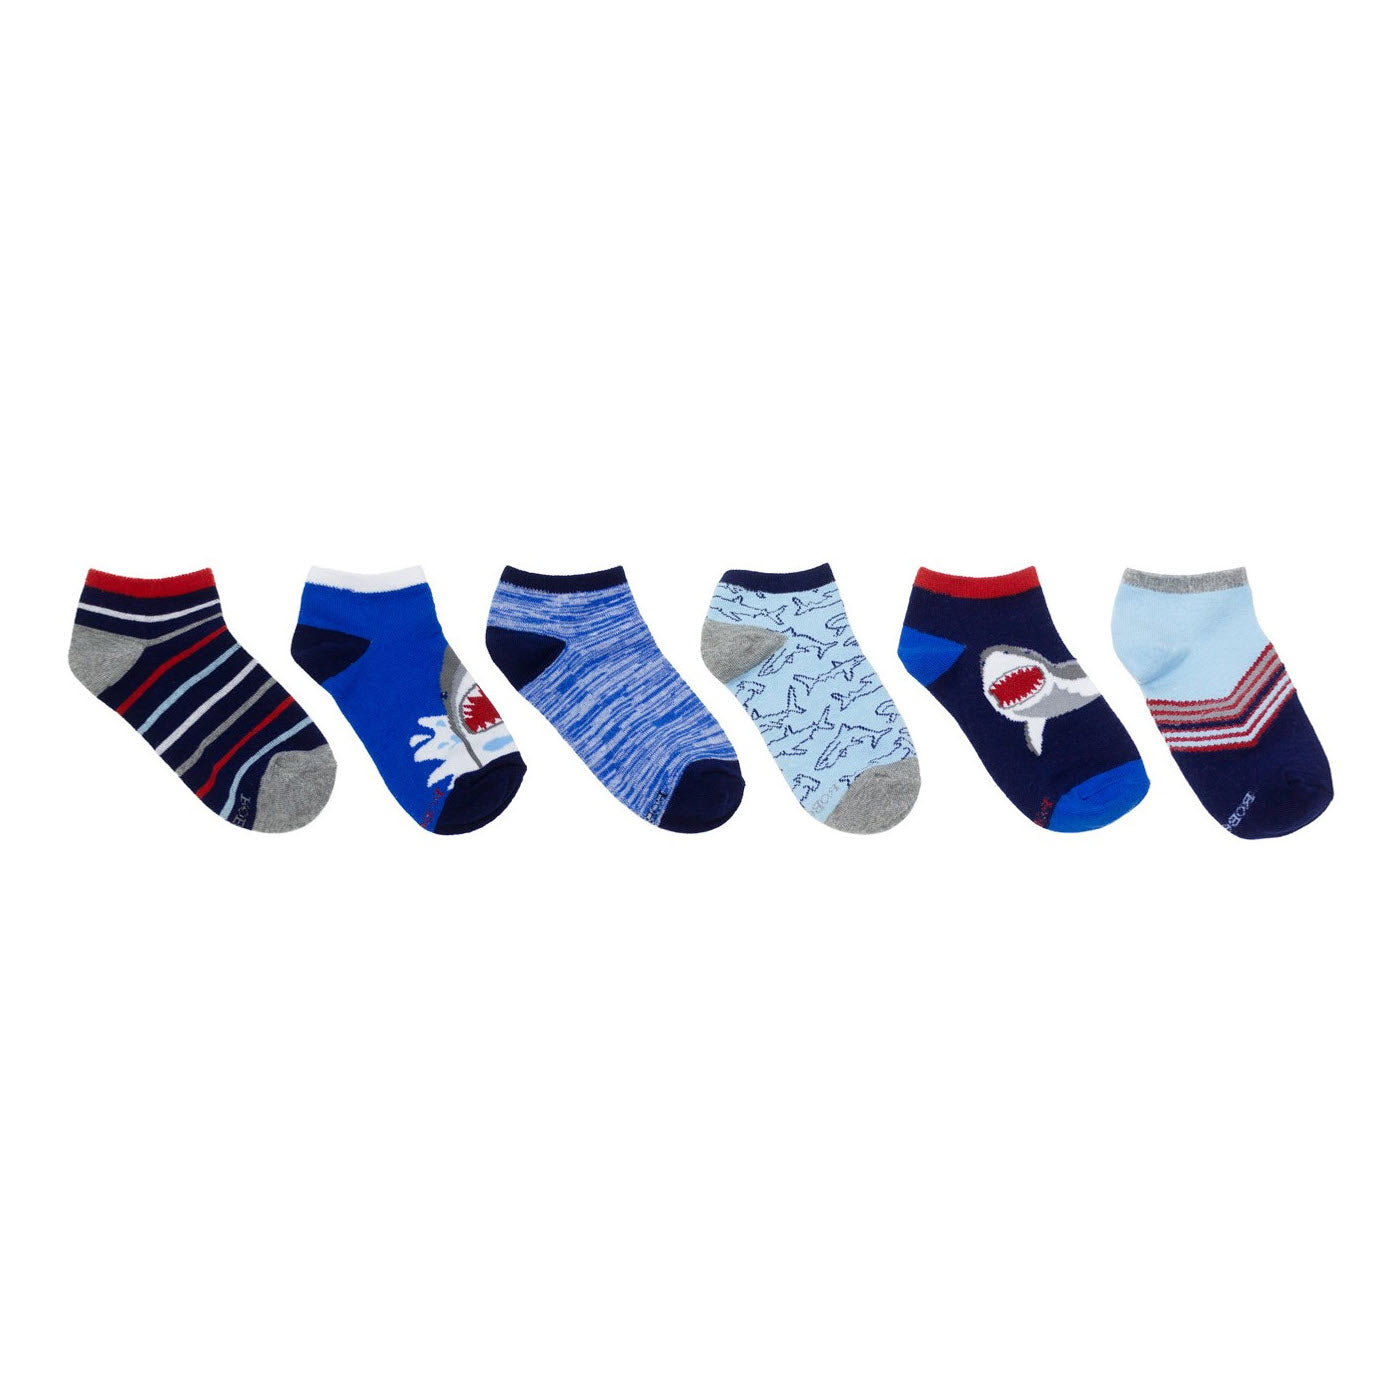 A row of Robeez no show socks in blue and red.